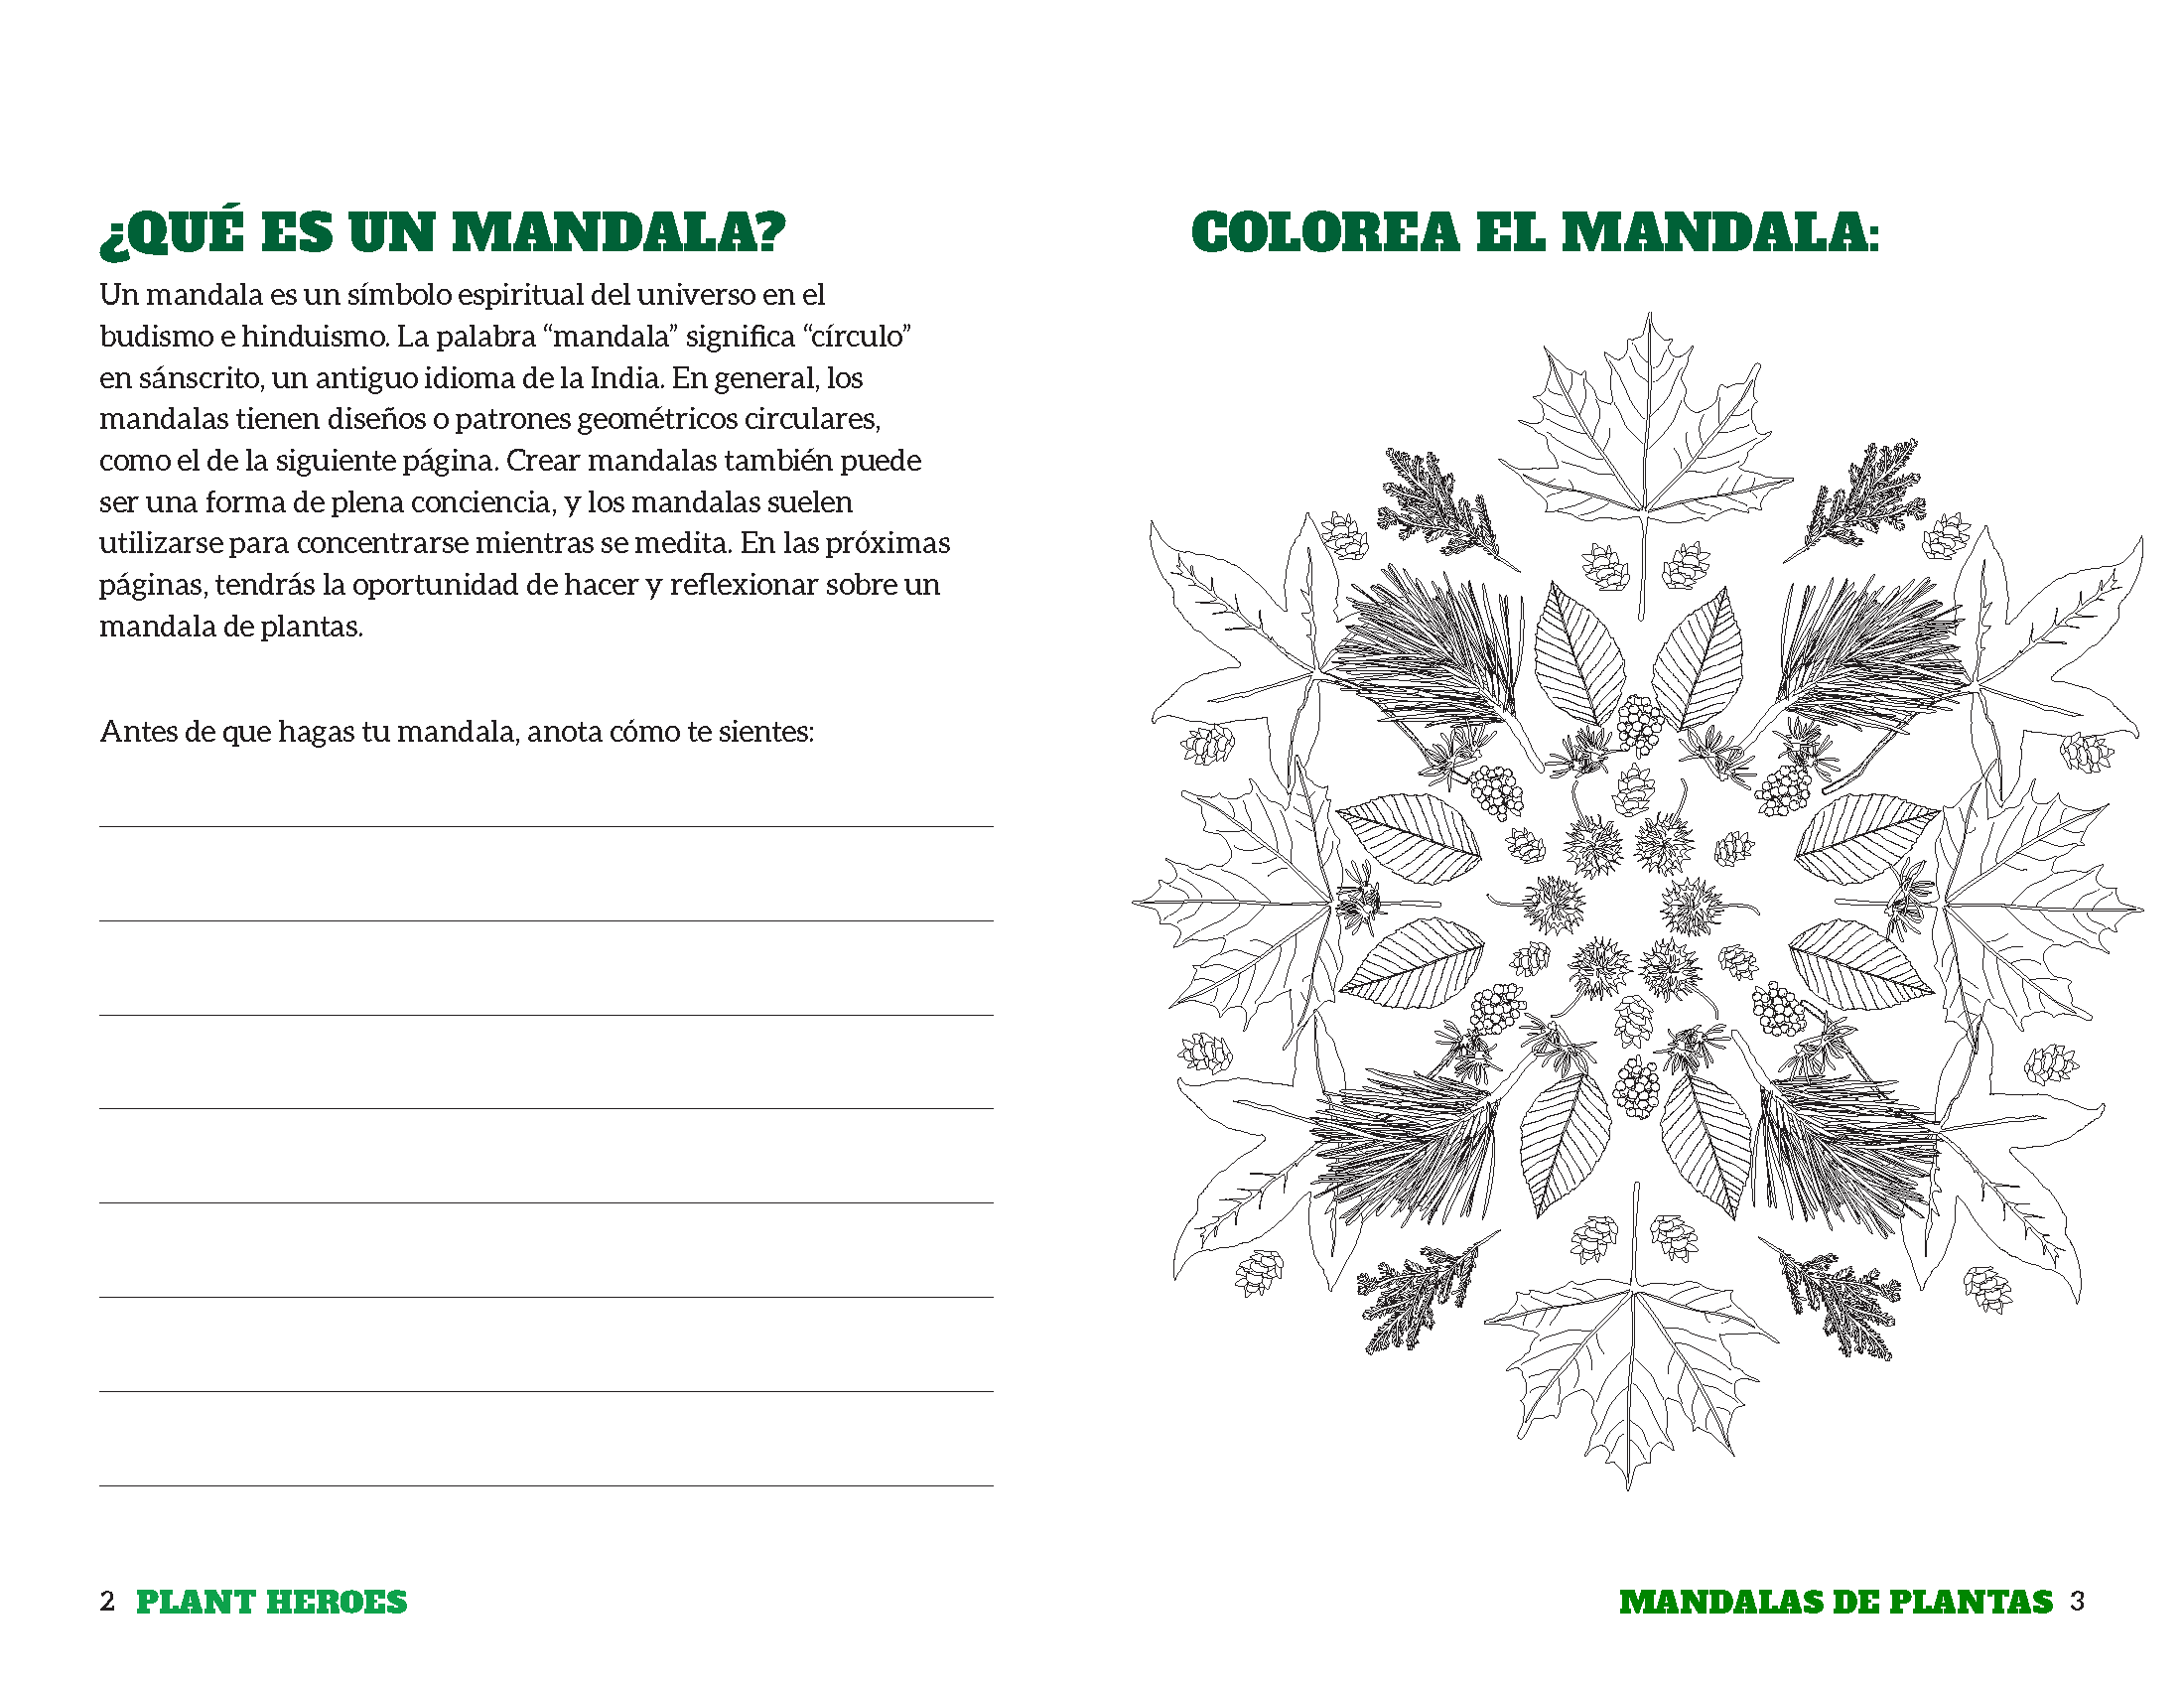 coloring sheet with a plant mandala featuring leaves and seeds.